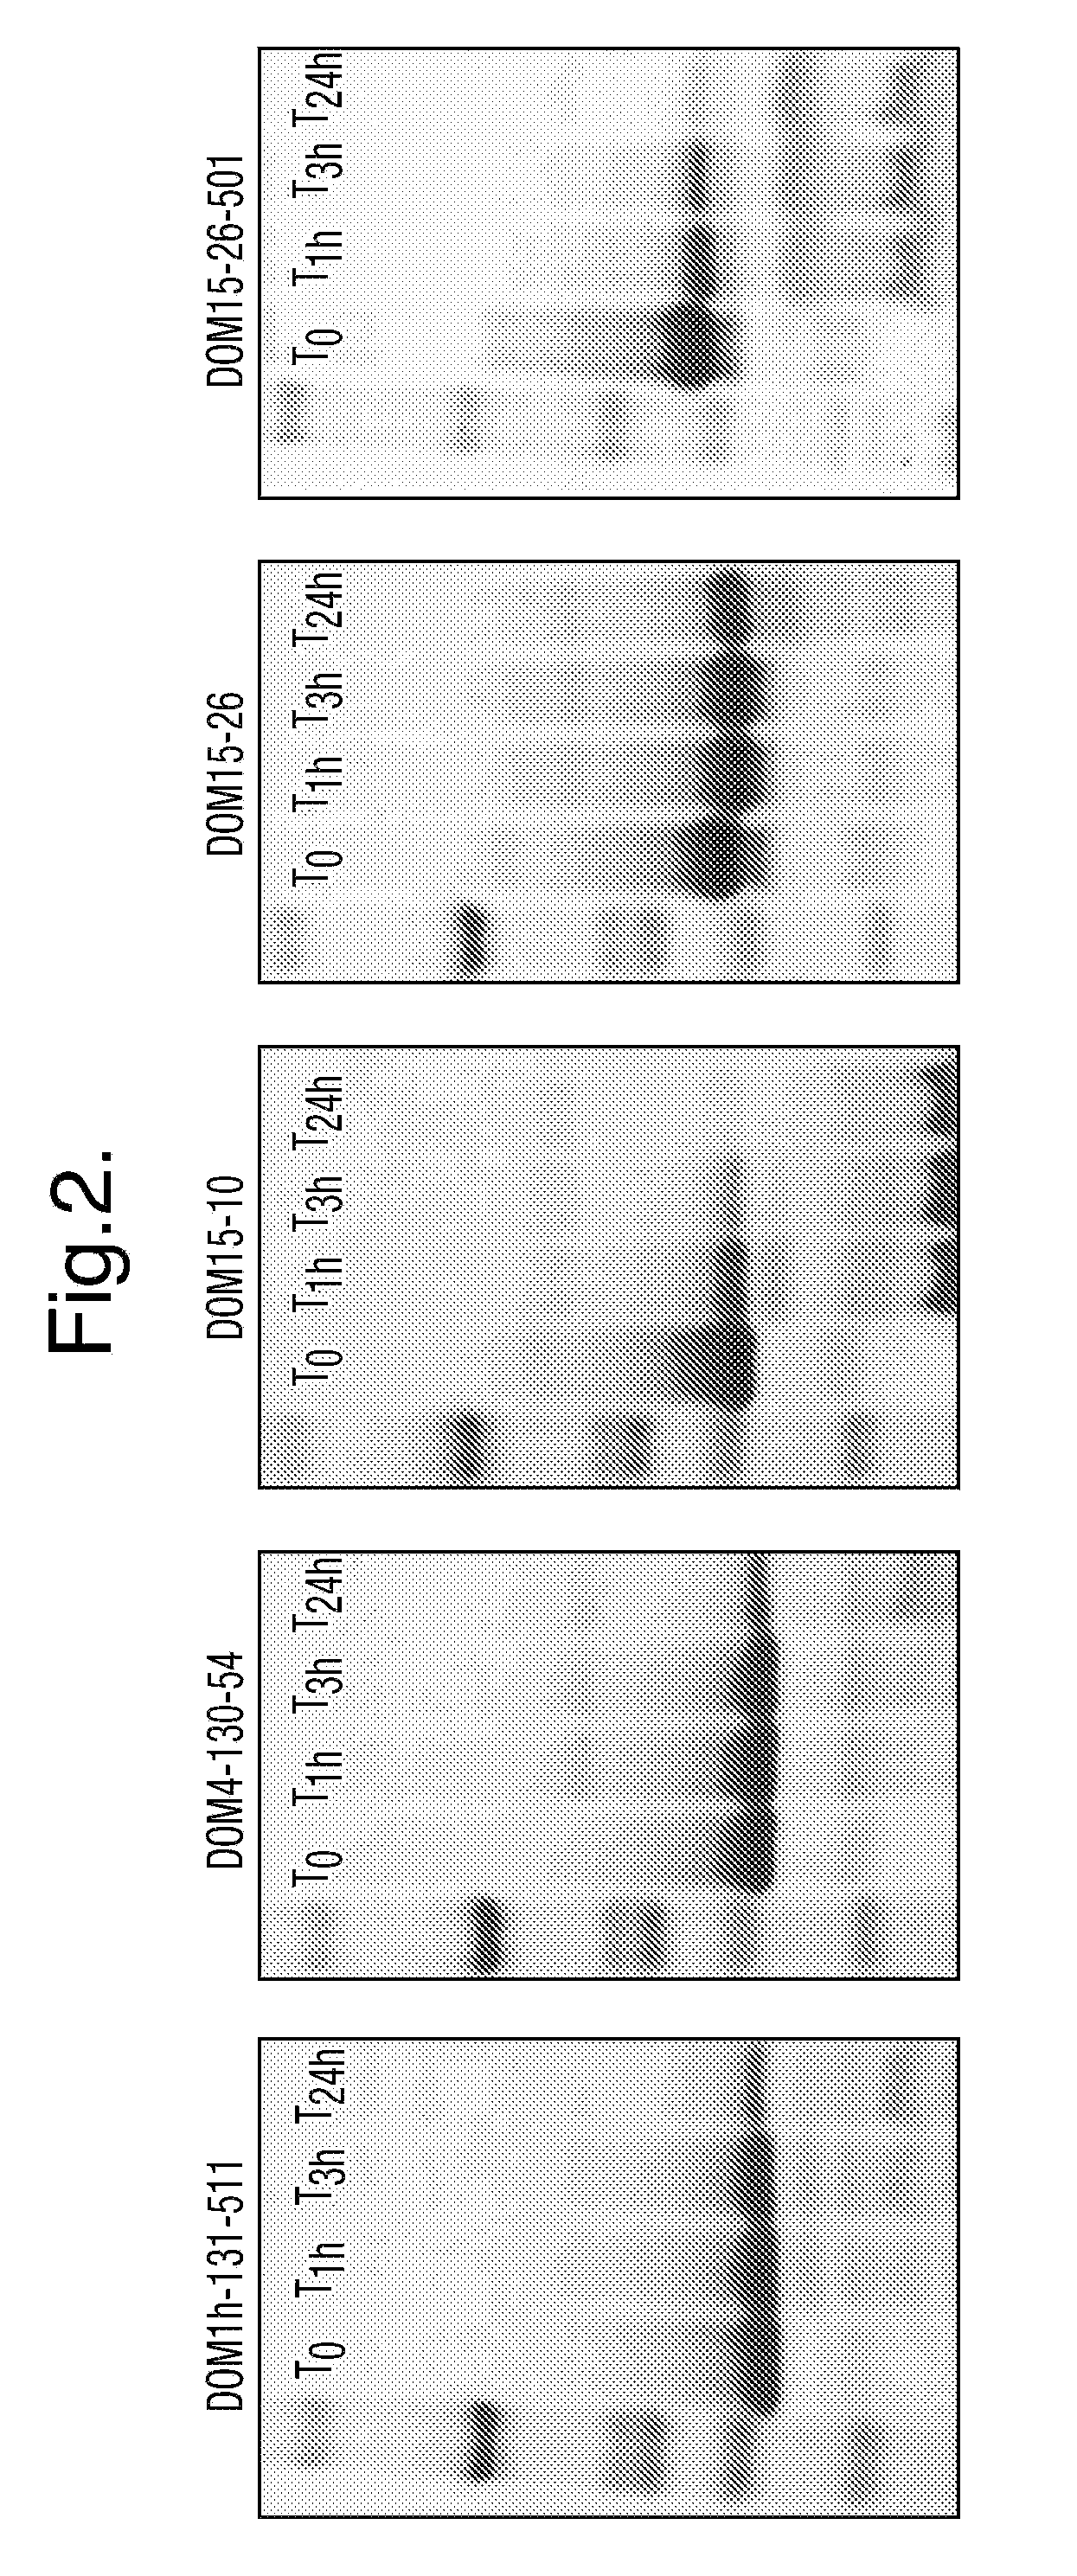 Polypeptides, antibody variable domains and antagonists